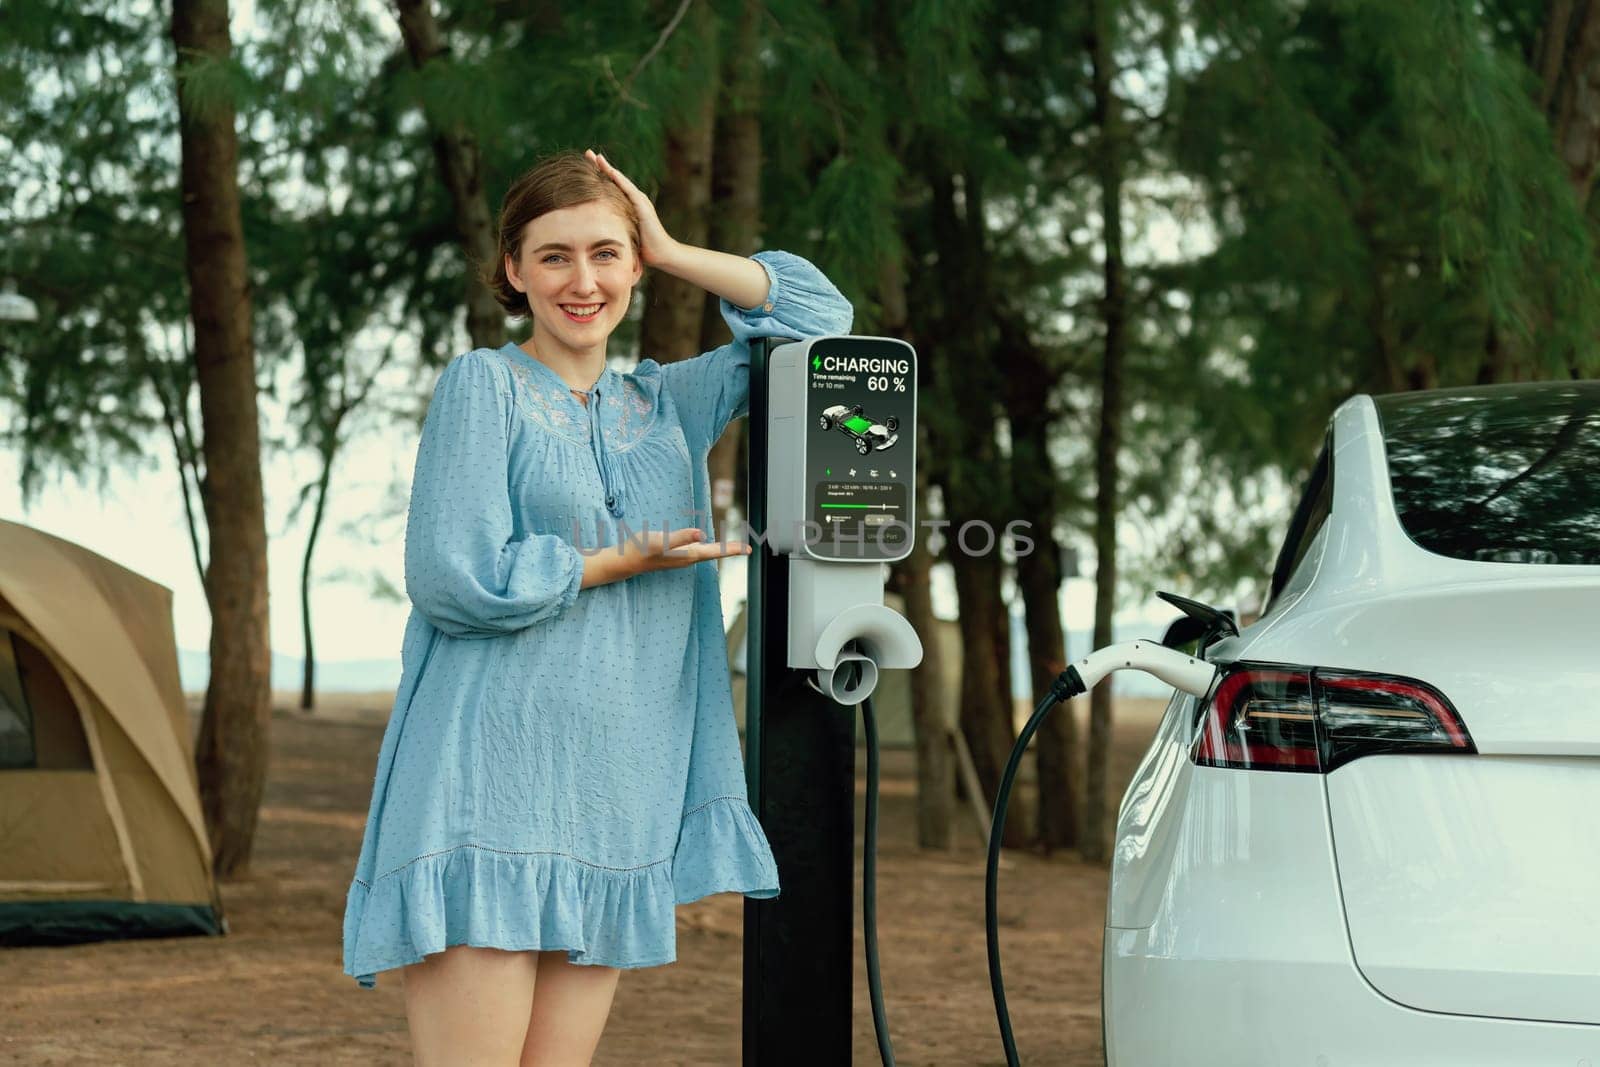 Holiday road trip vacation traveling to the beach camp with electric car, young woman recharge EV vehicle with green and clean energy. Beach travel camping with eco-friendly EV car .Perpetual